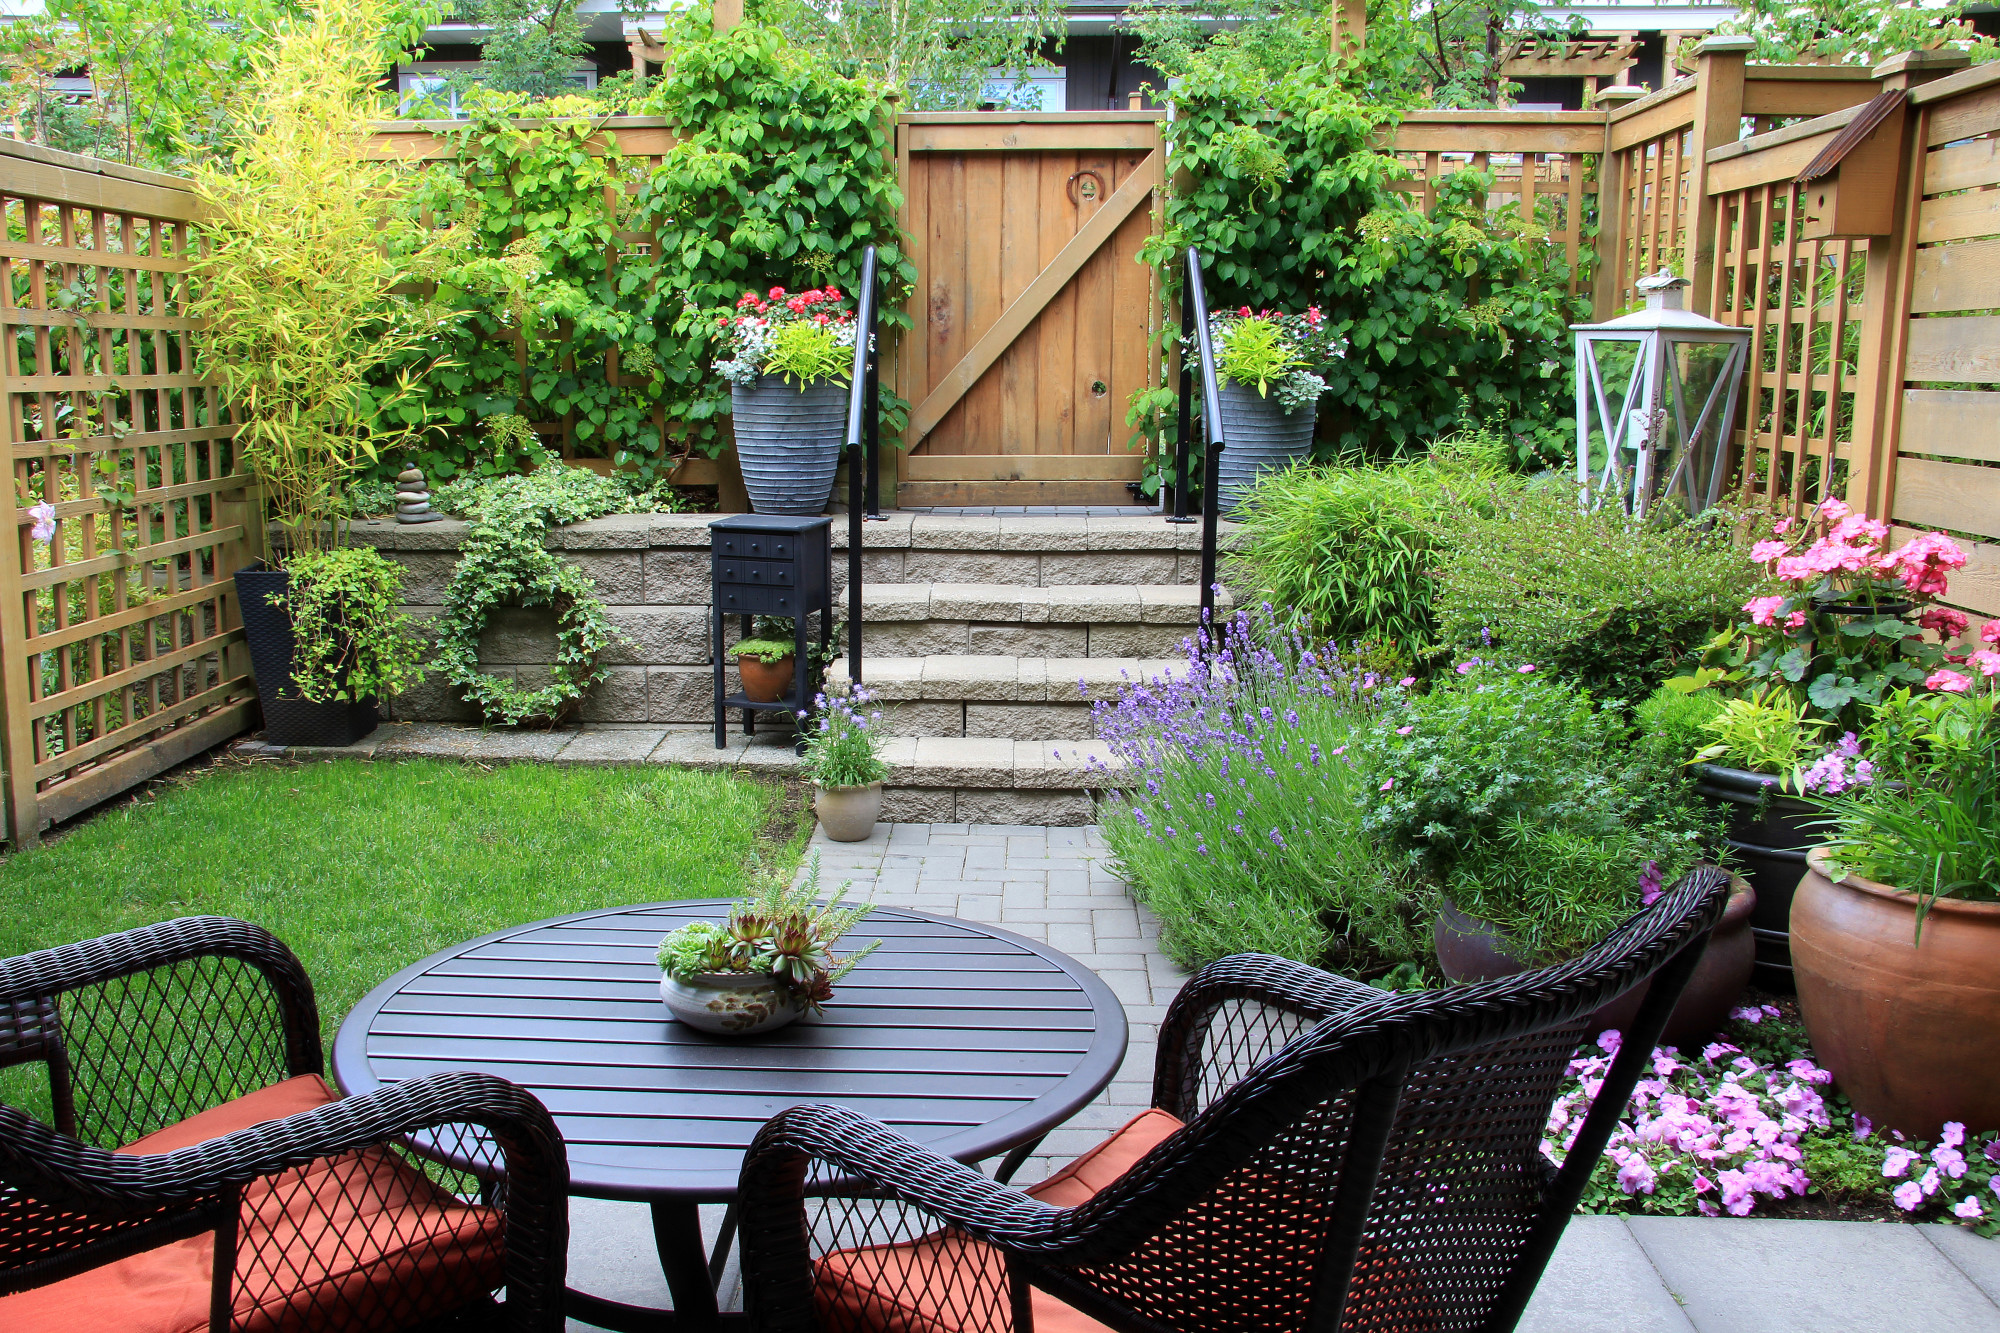 If you have a small budget, it doesn't mean you can't have a beautiful garden. Here are the backyard design ideas to help you achieve your garden goals.